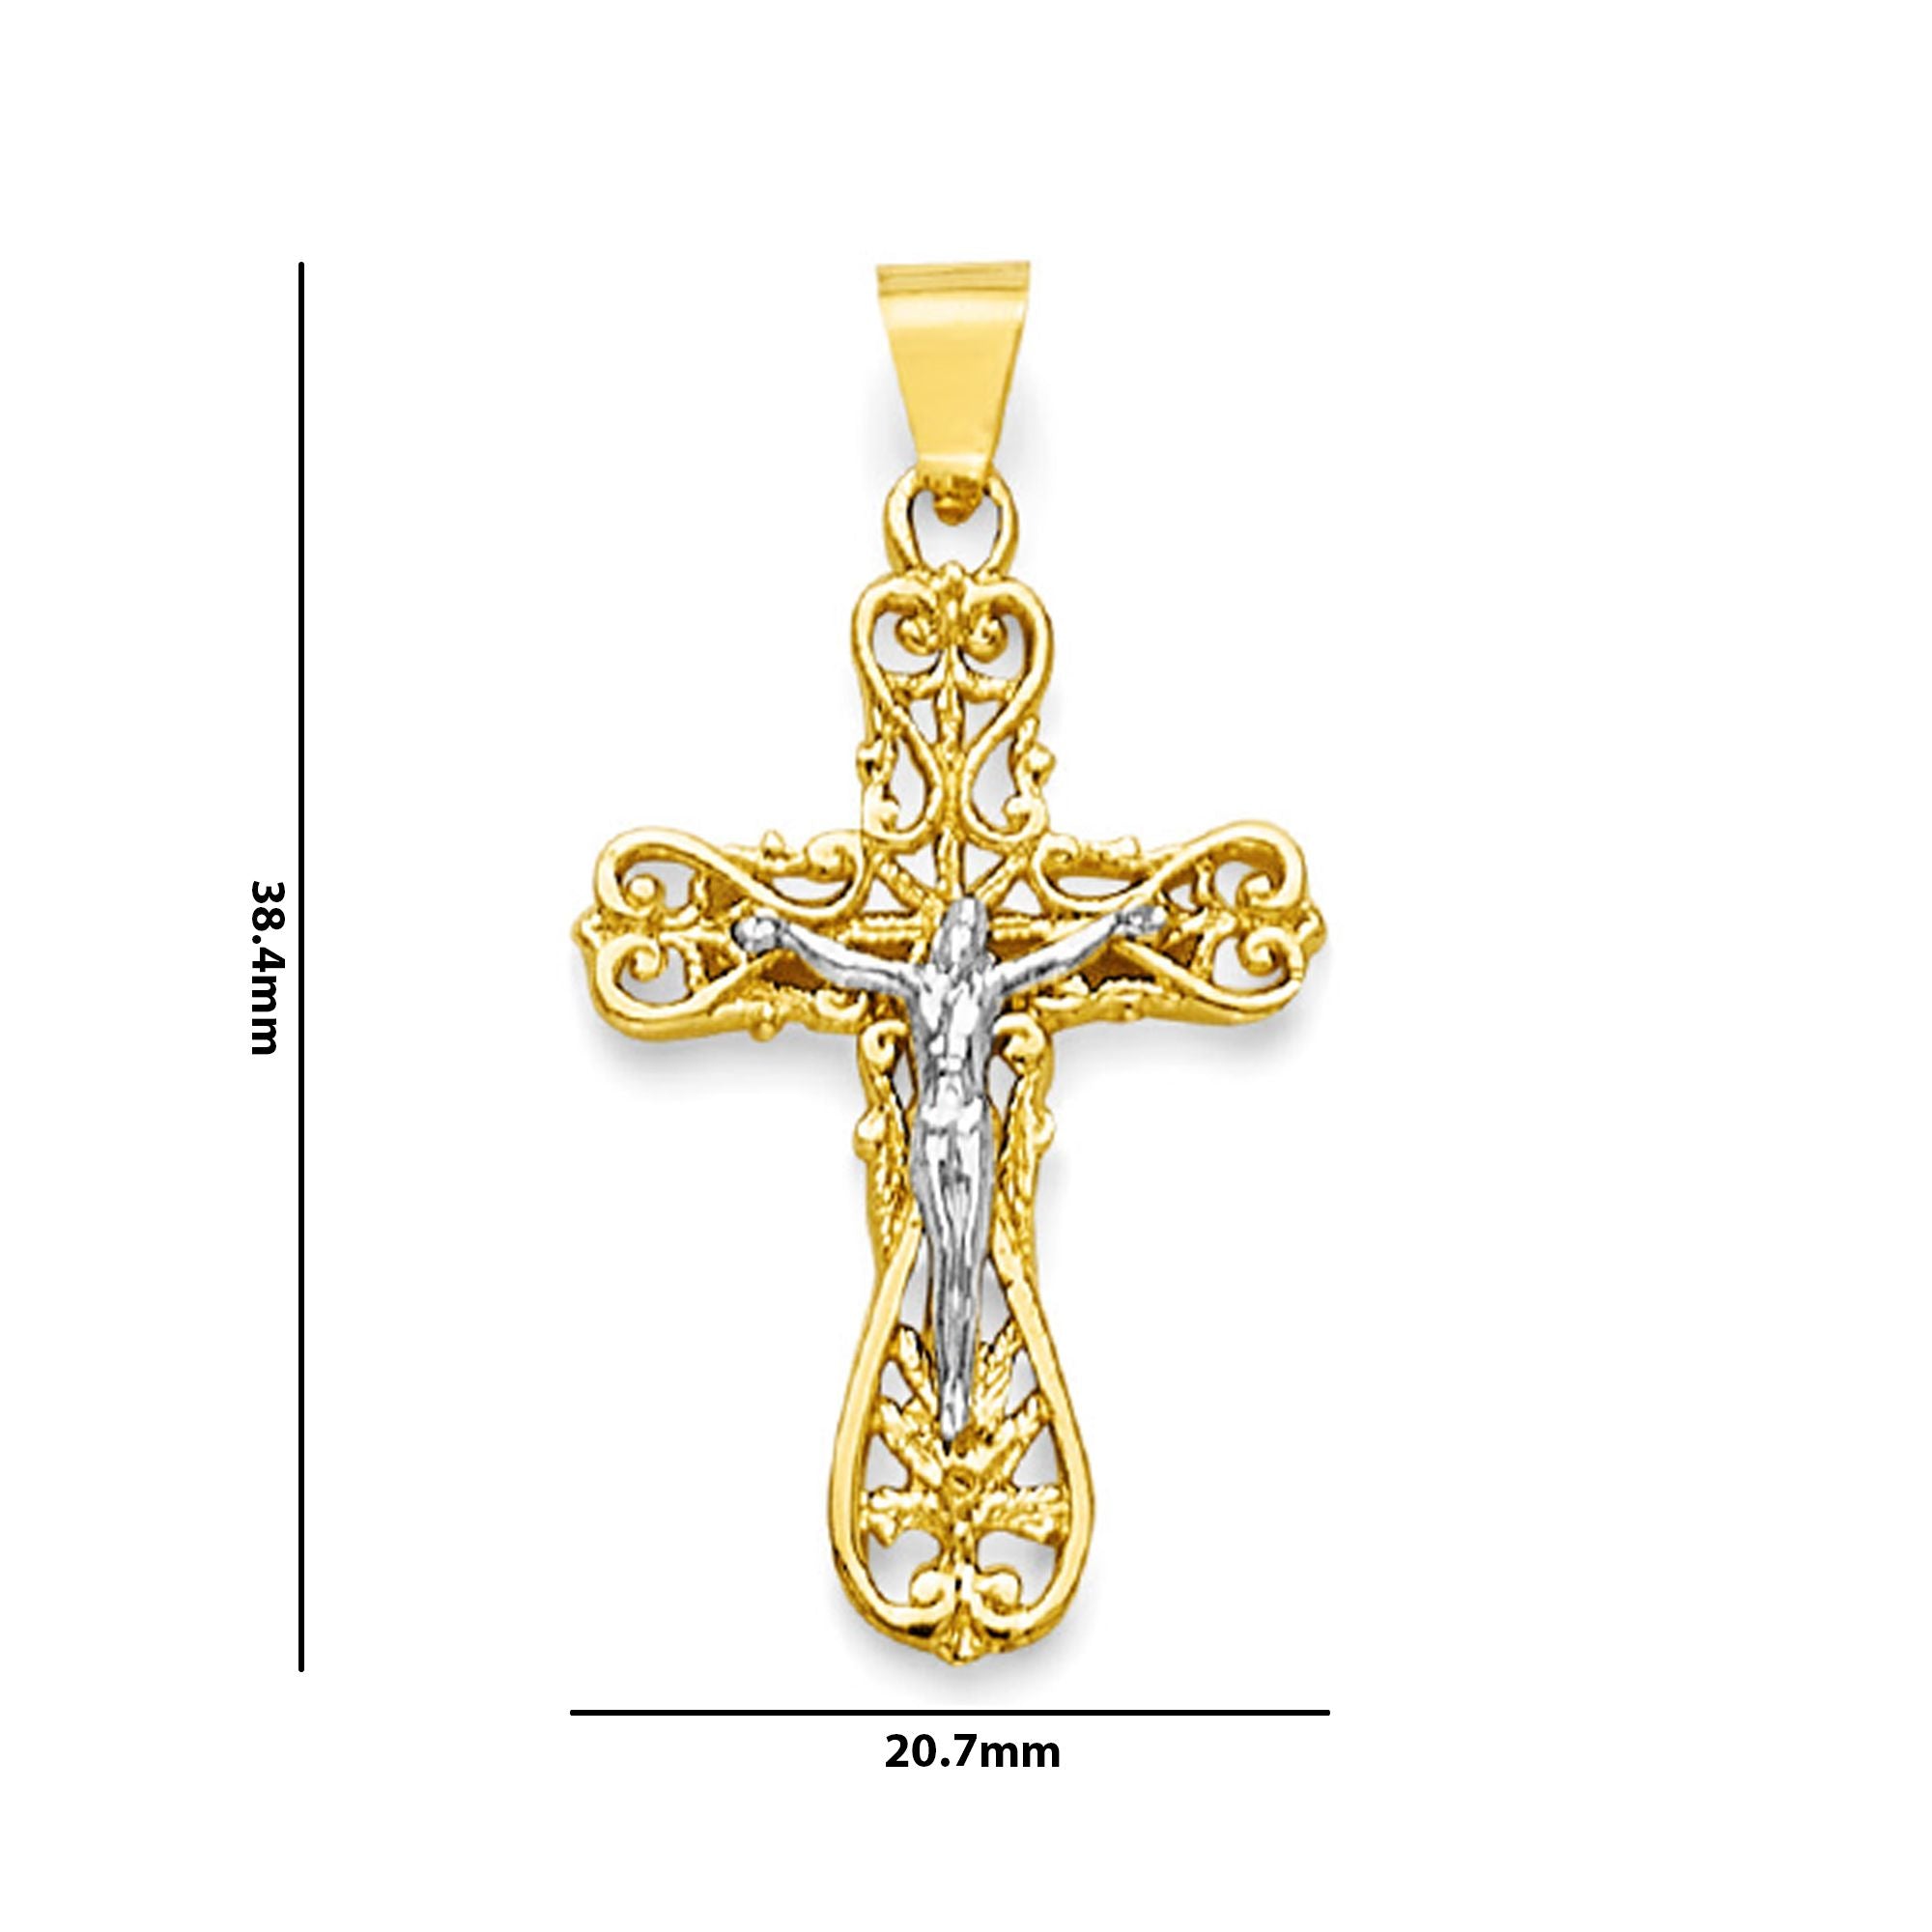 Two Tone Gold Filigree Cutout Patonce Crucifix Cross Pendant with Measurement